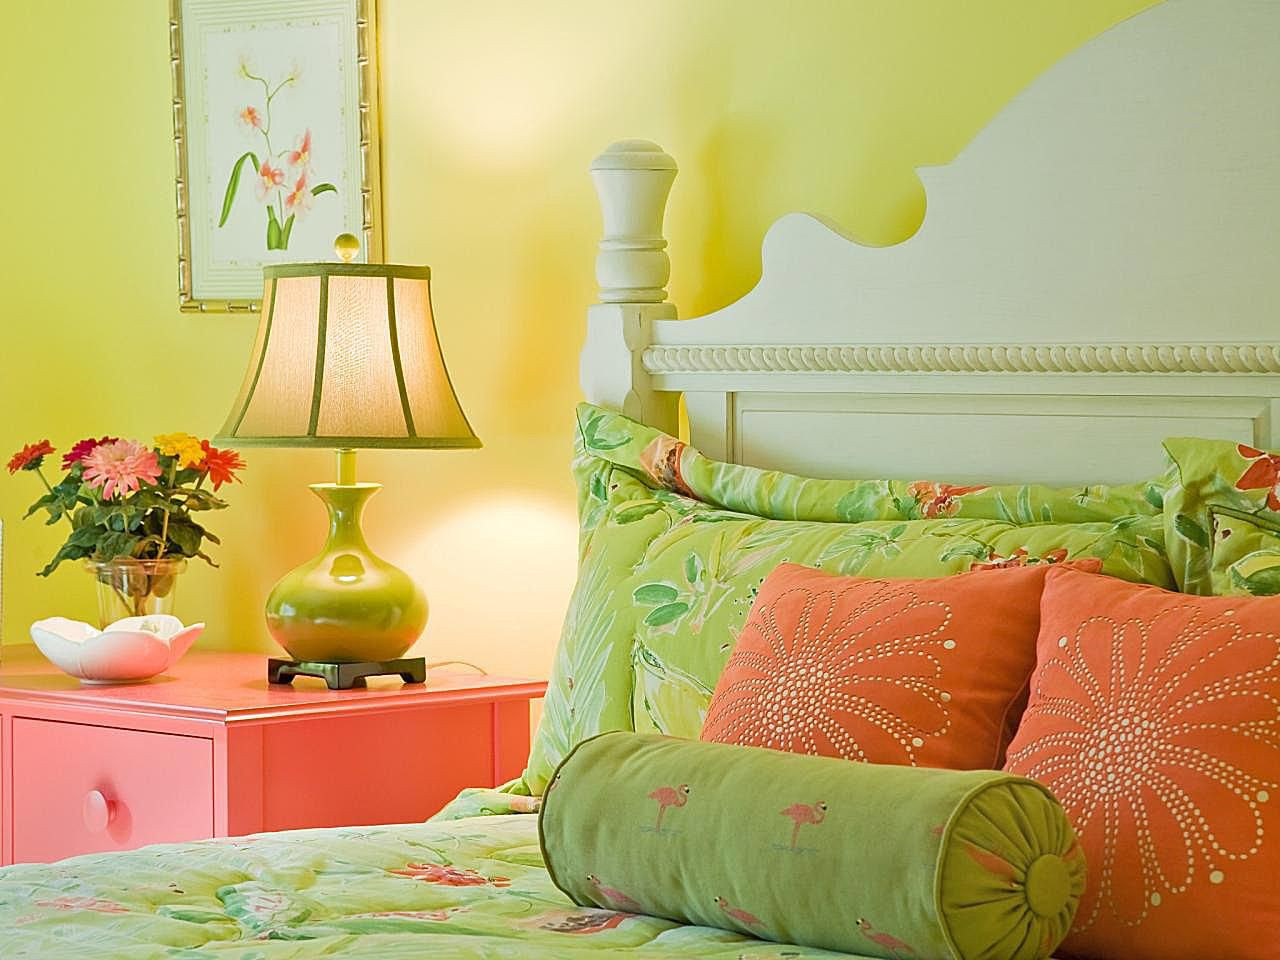 Colorful Bedroom Ideas
 9 Colorful Decoration Ideas for a Small Bedroom